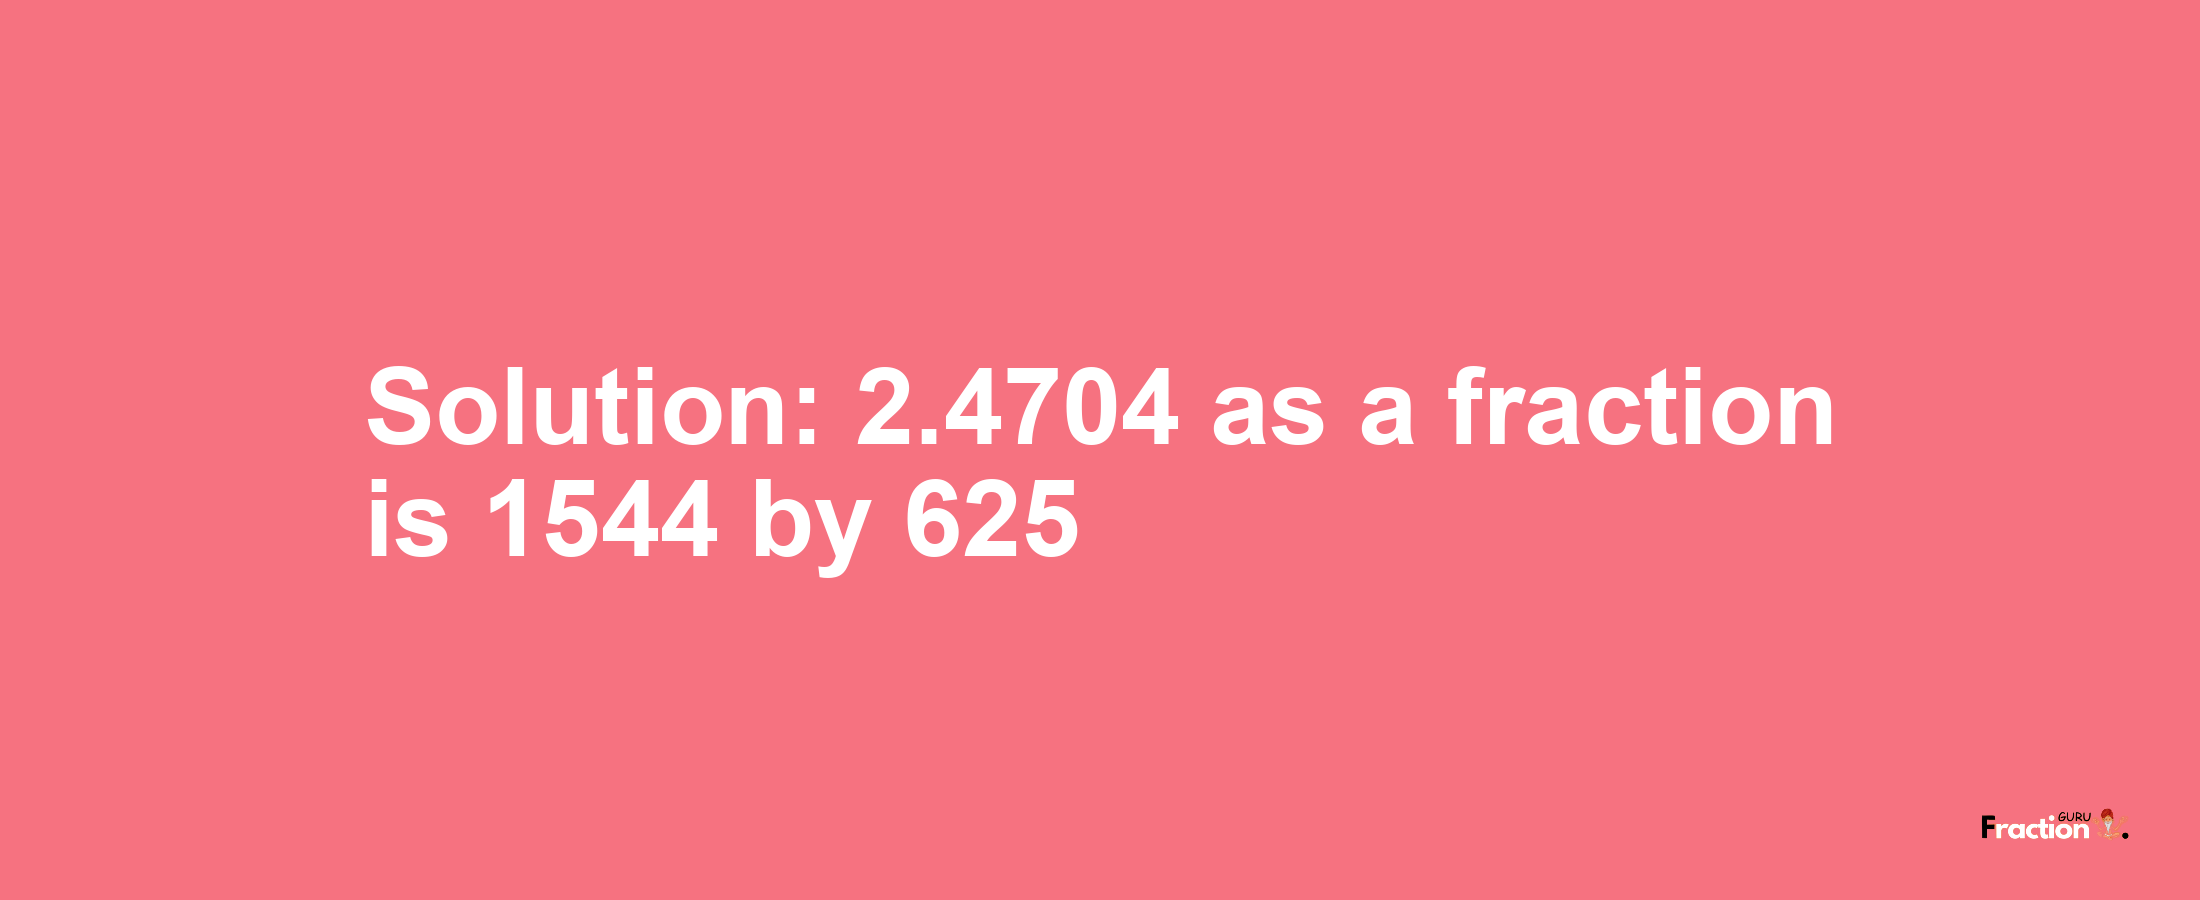 Solution:2.4704 as a fraction is 1544/625